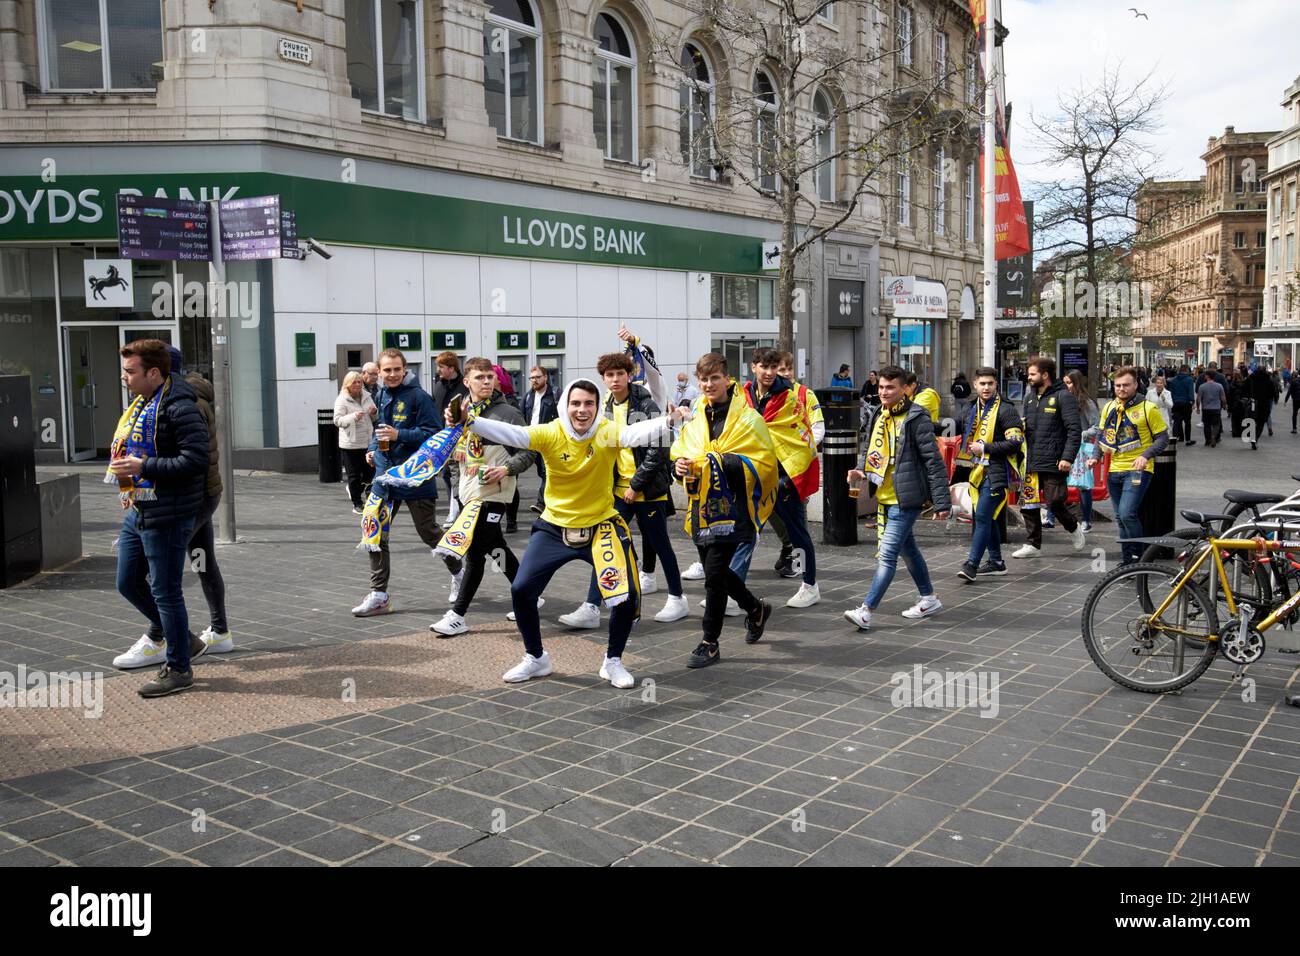 visiting villareal fans for champions league semi final in liverpool city centre Liverpool England UK Stock Photo